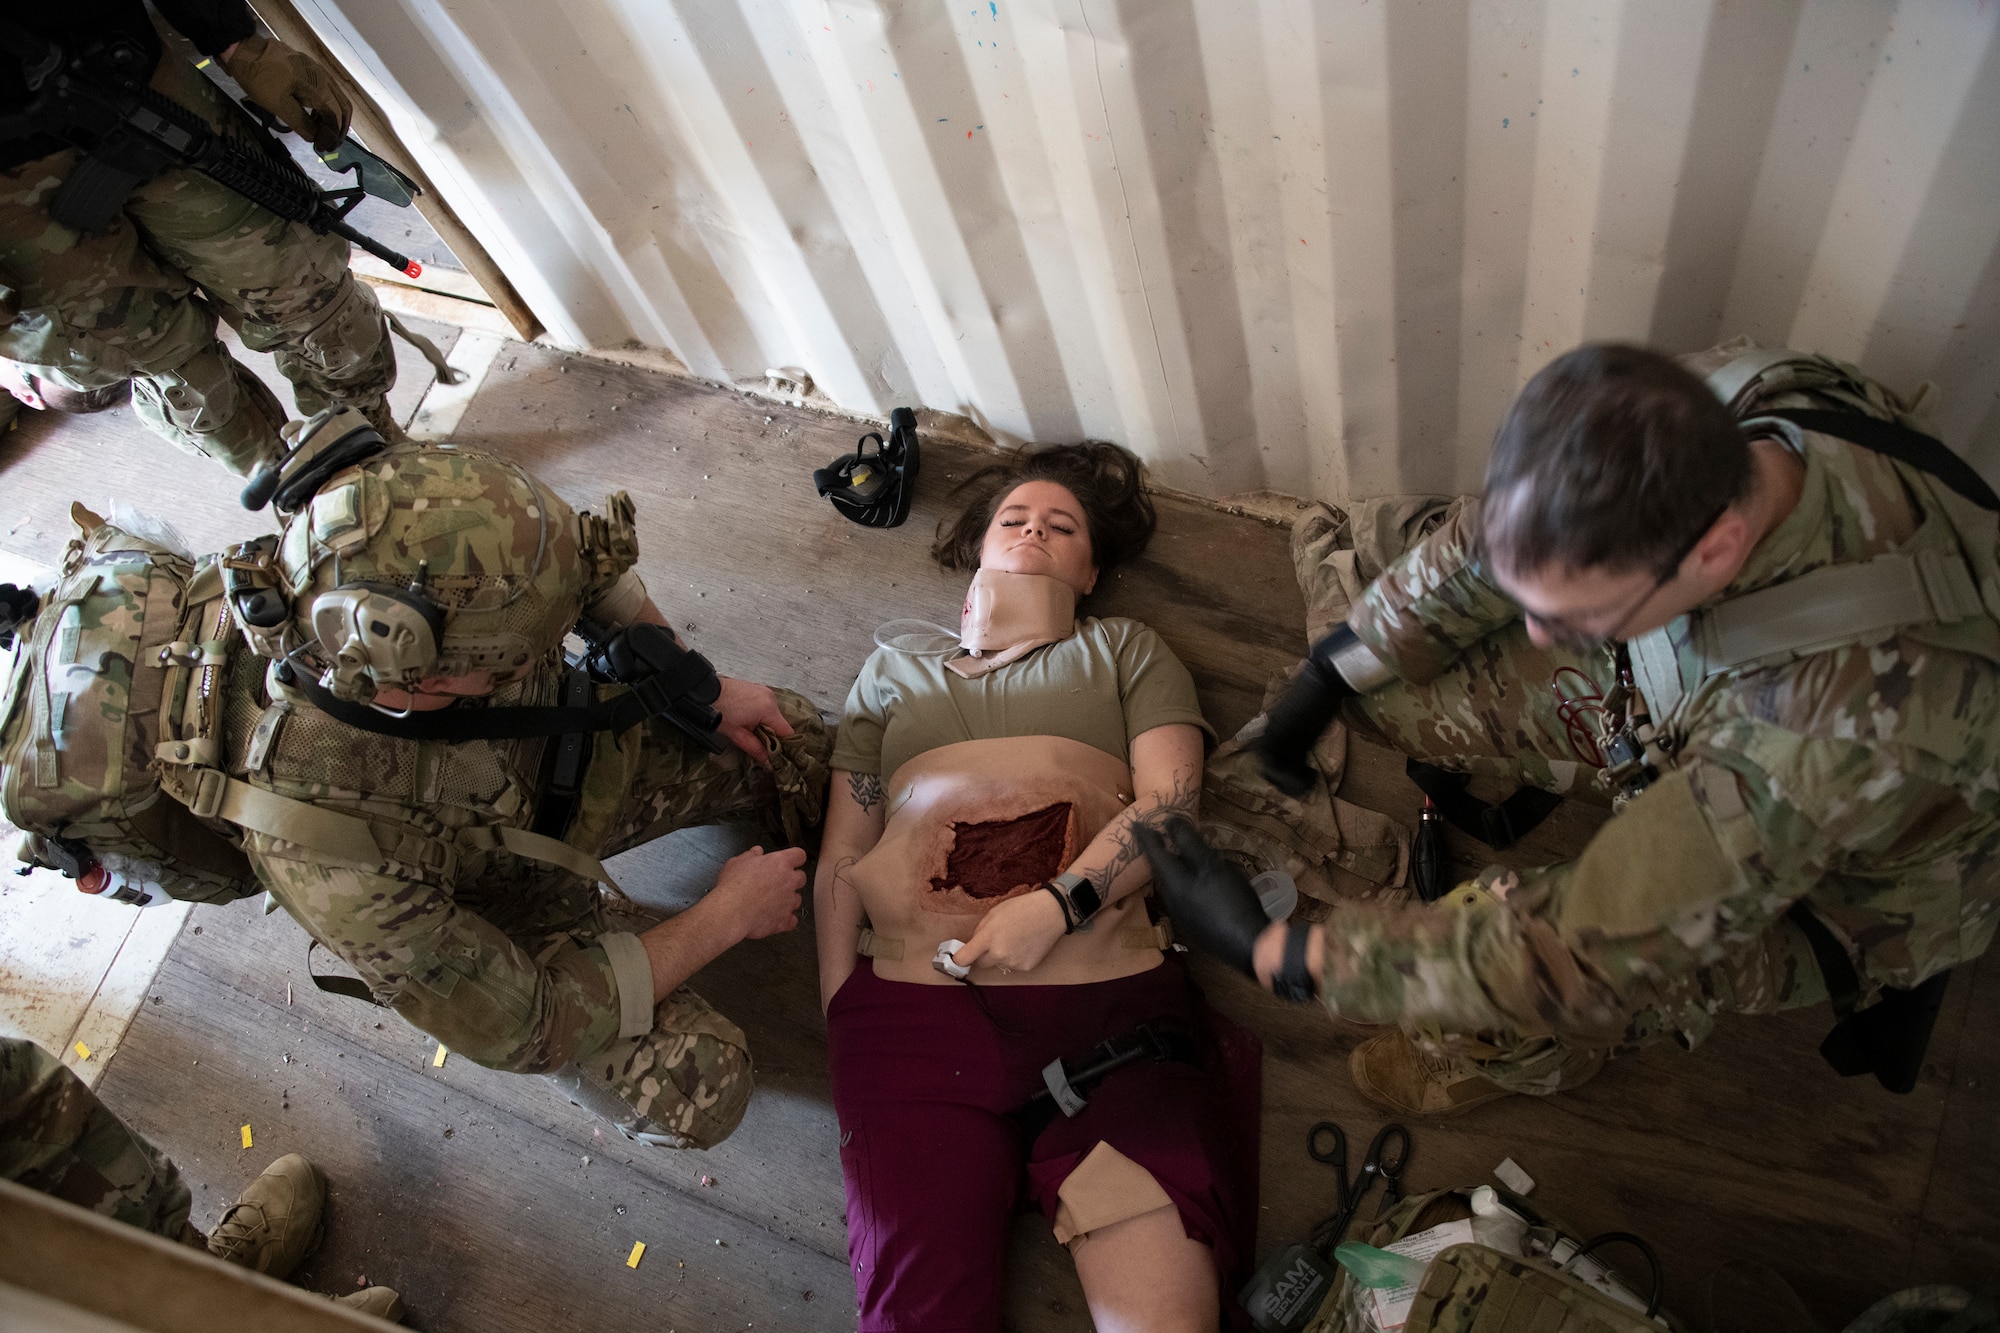 Airman attend to simulated wounded.